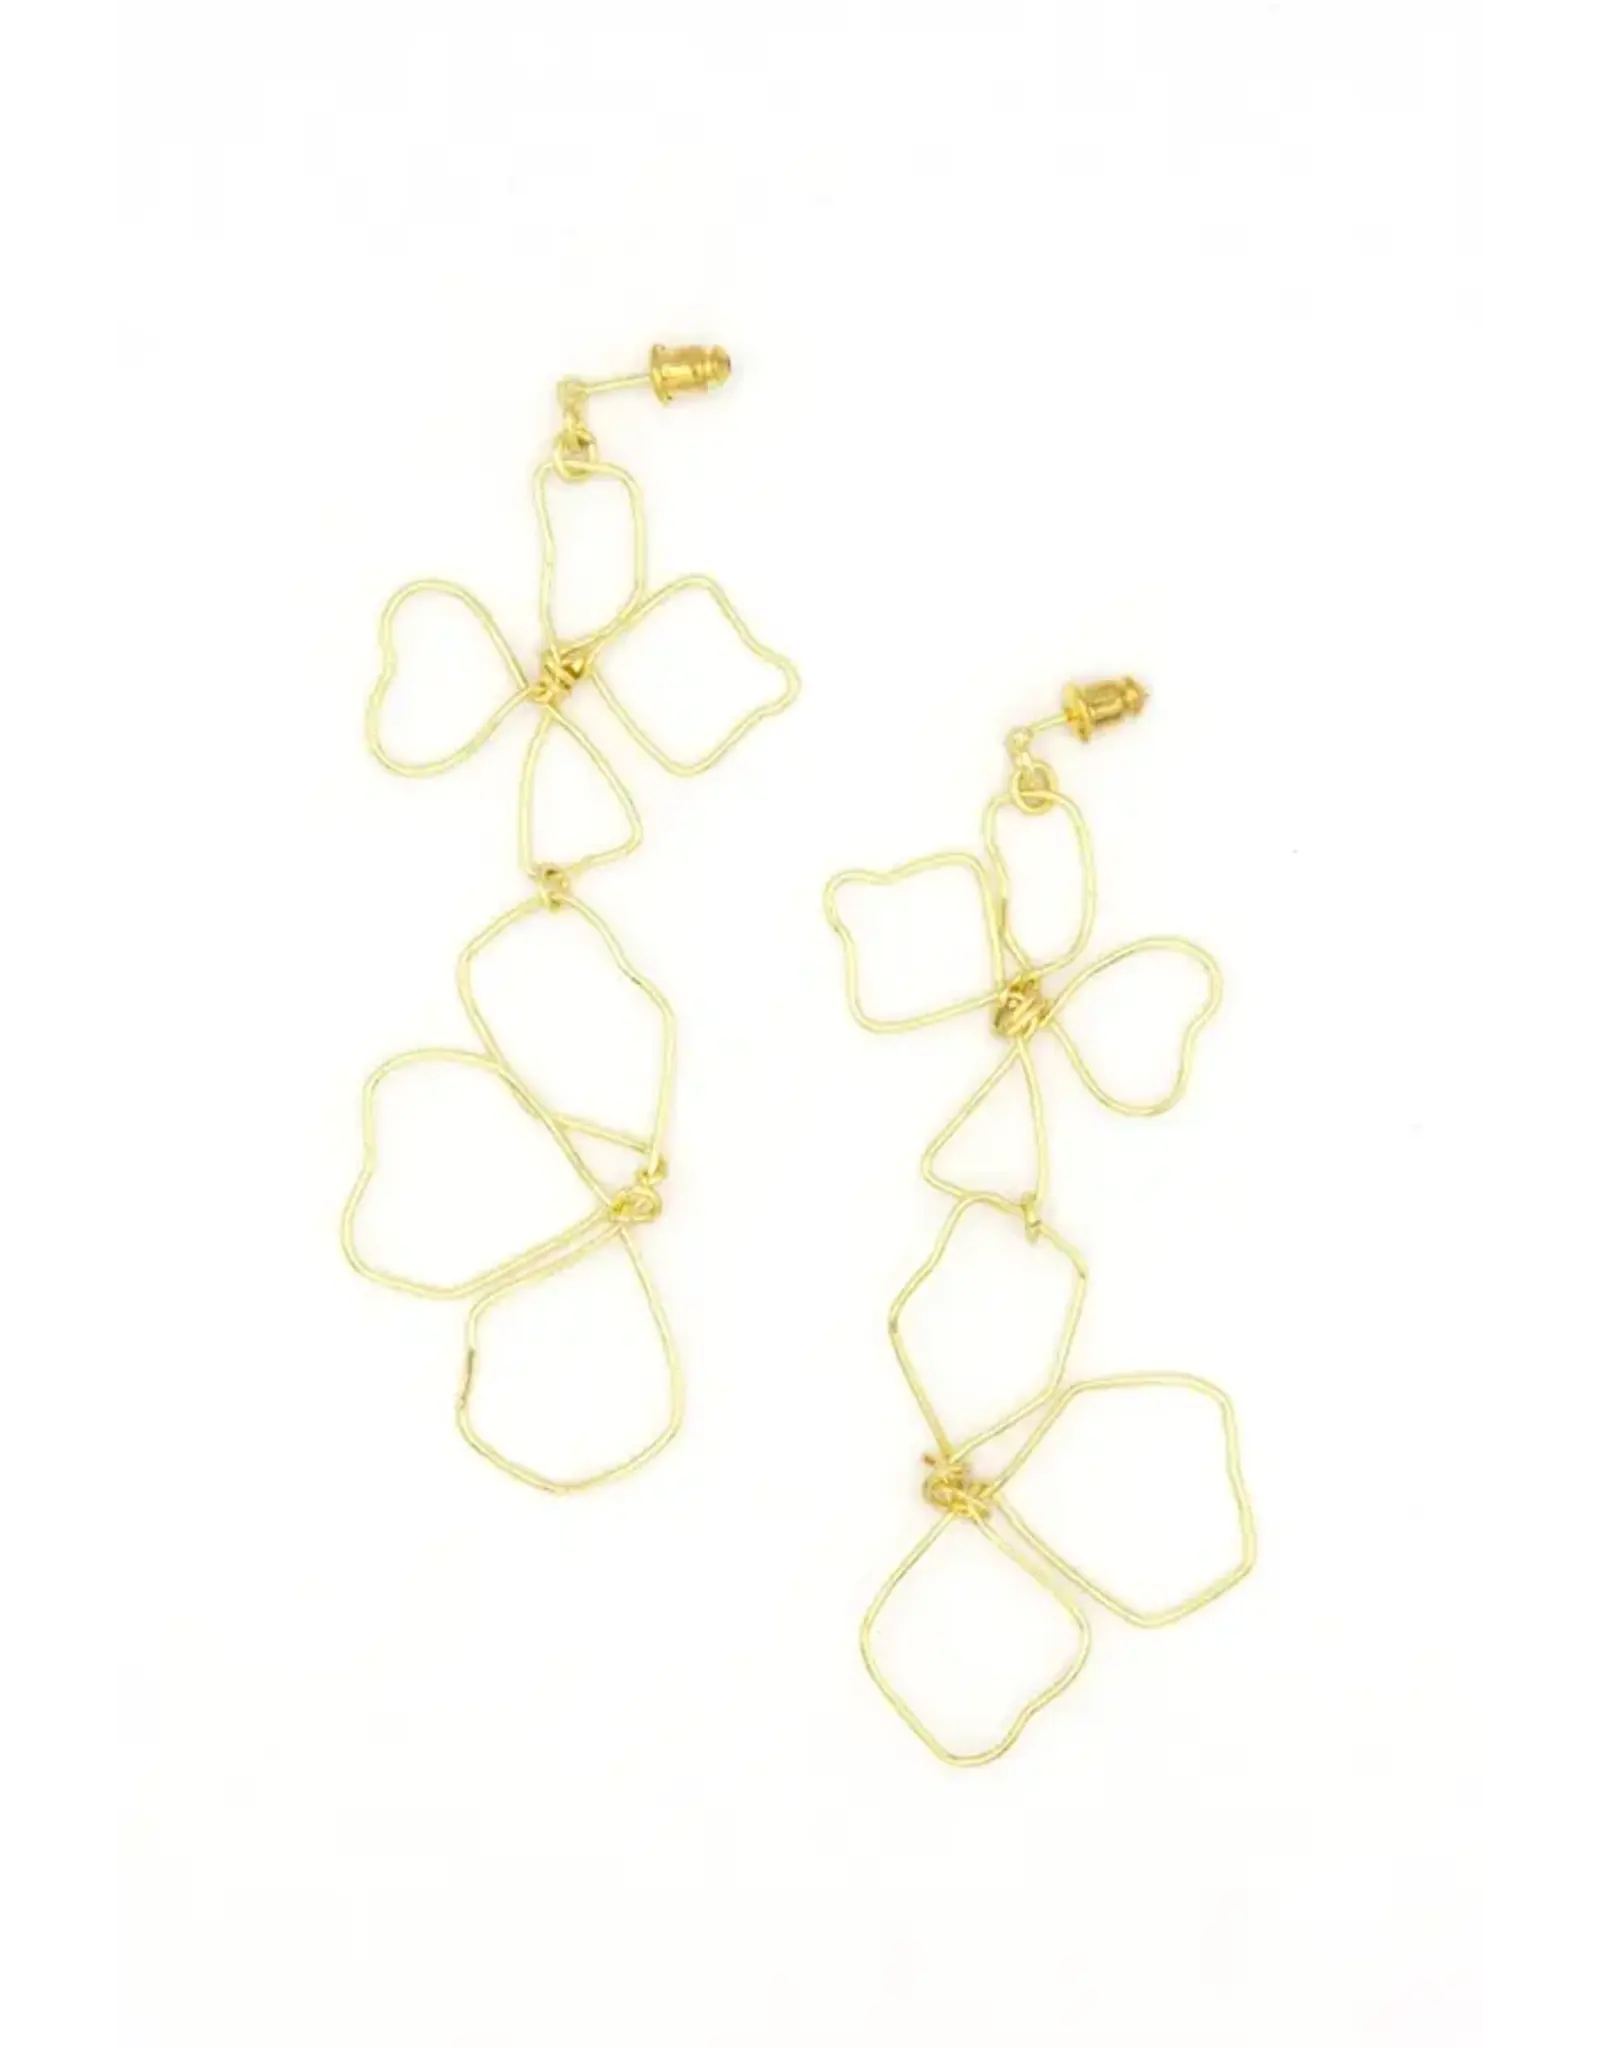 India Continuous Line Art Wildflower Earrings, India